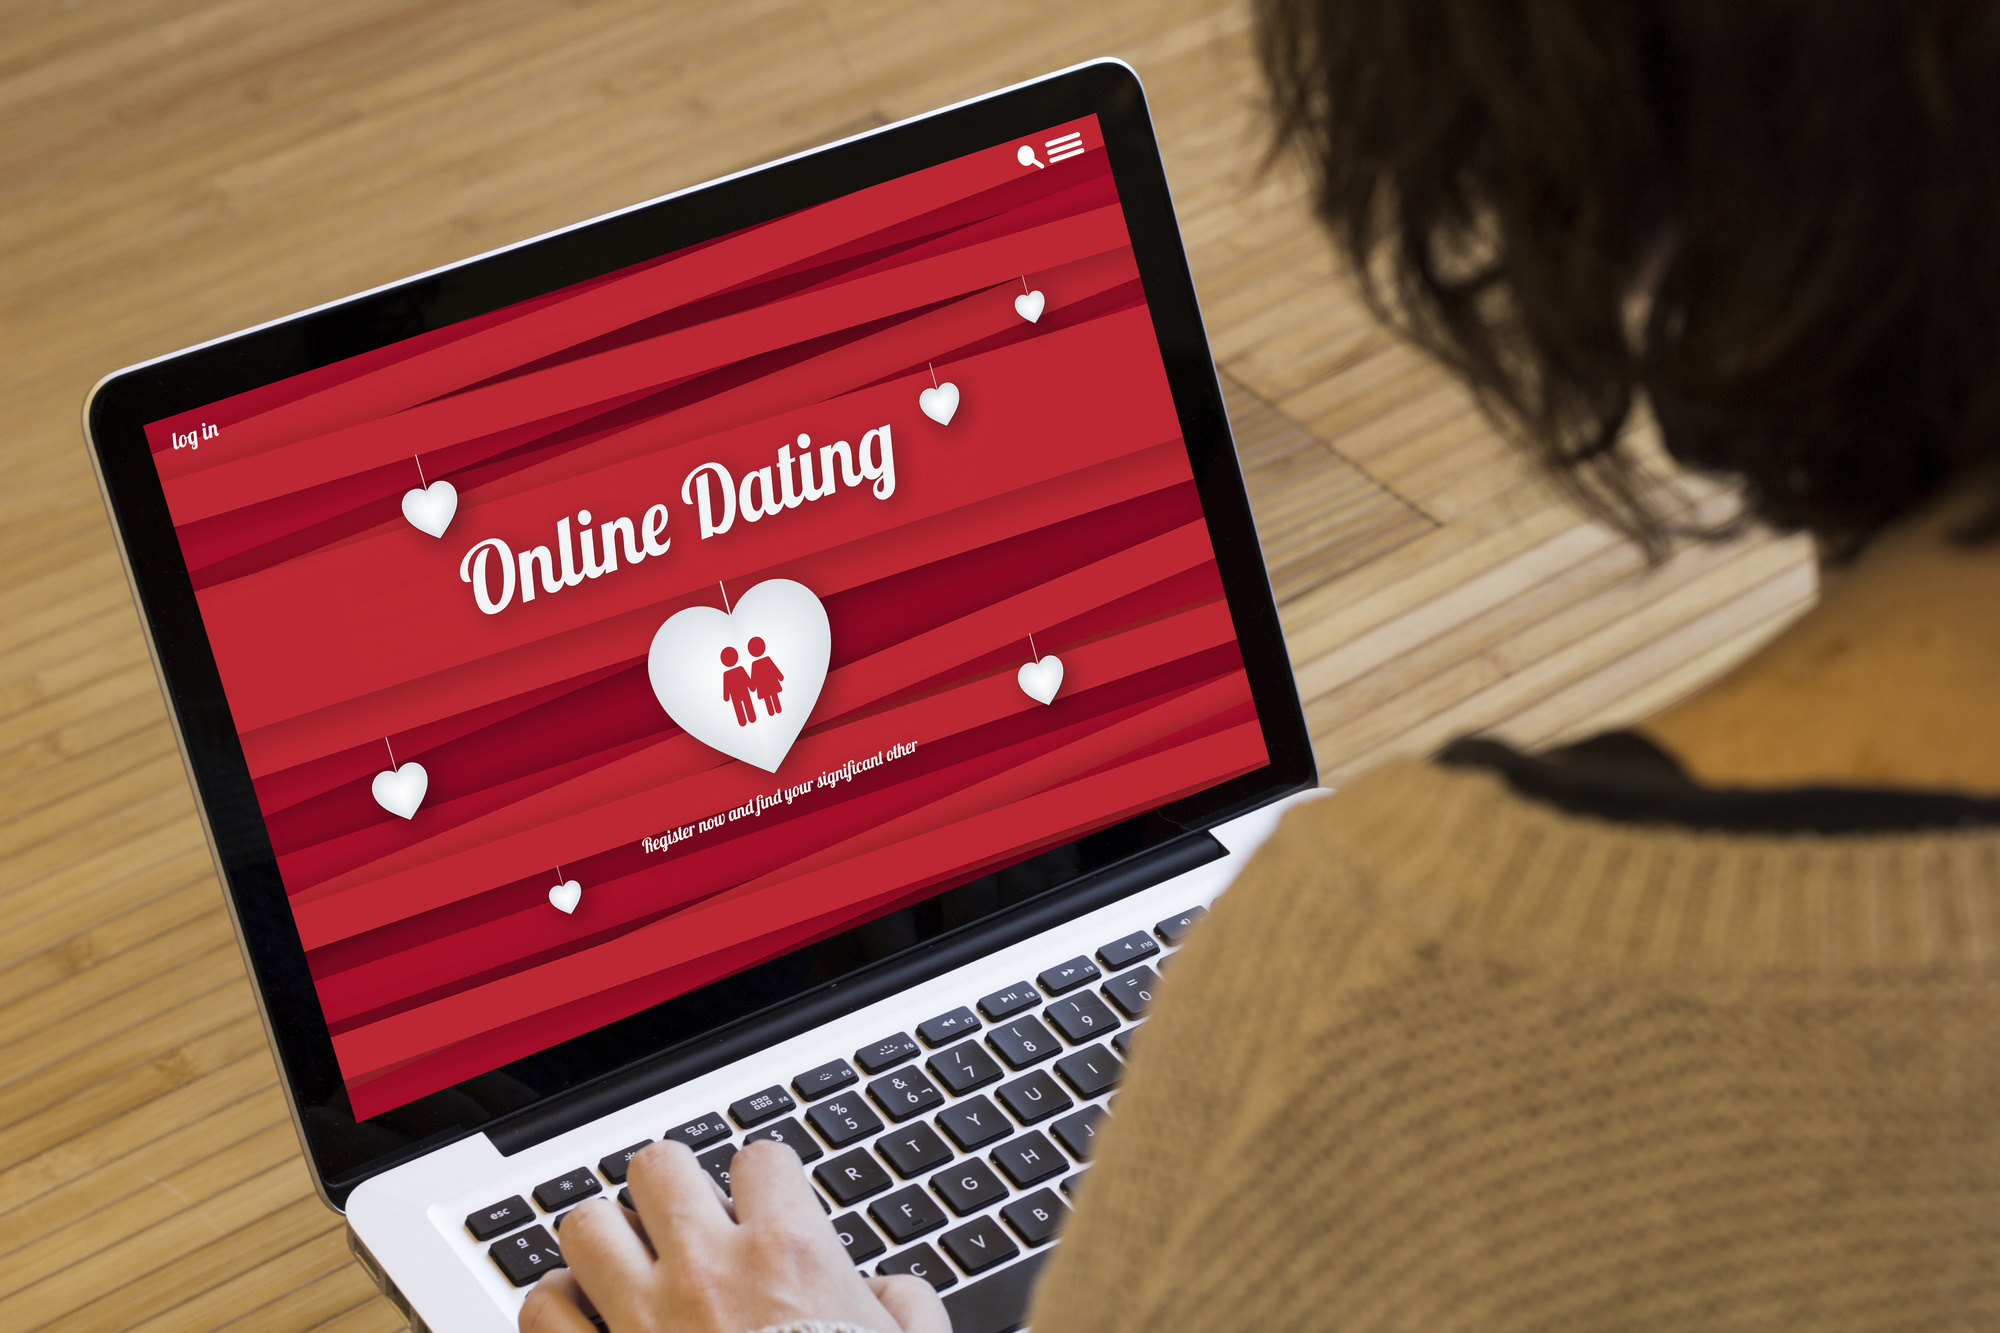 Bbb Warning Public To Be Careful With Hearts And Wallets When Using Online Dating Services